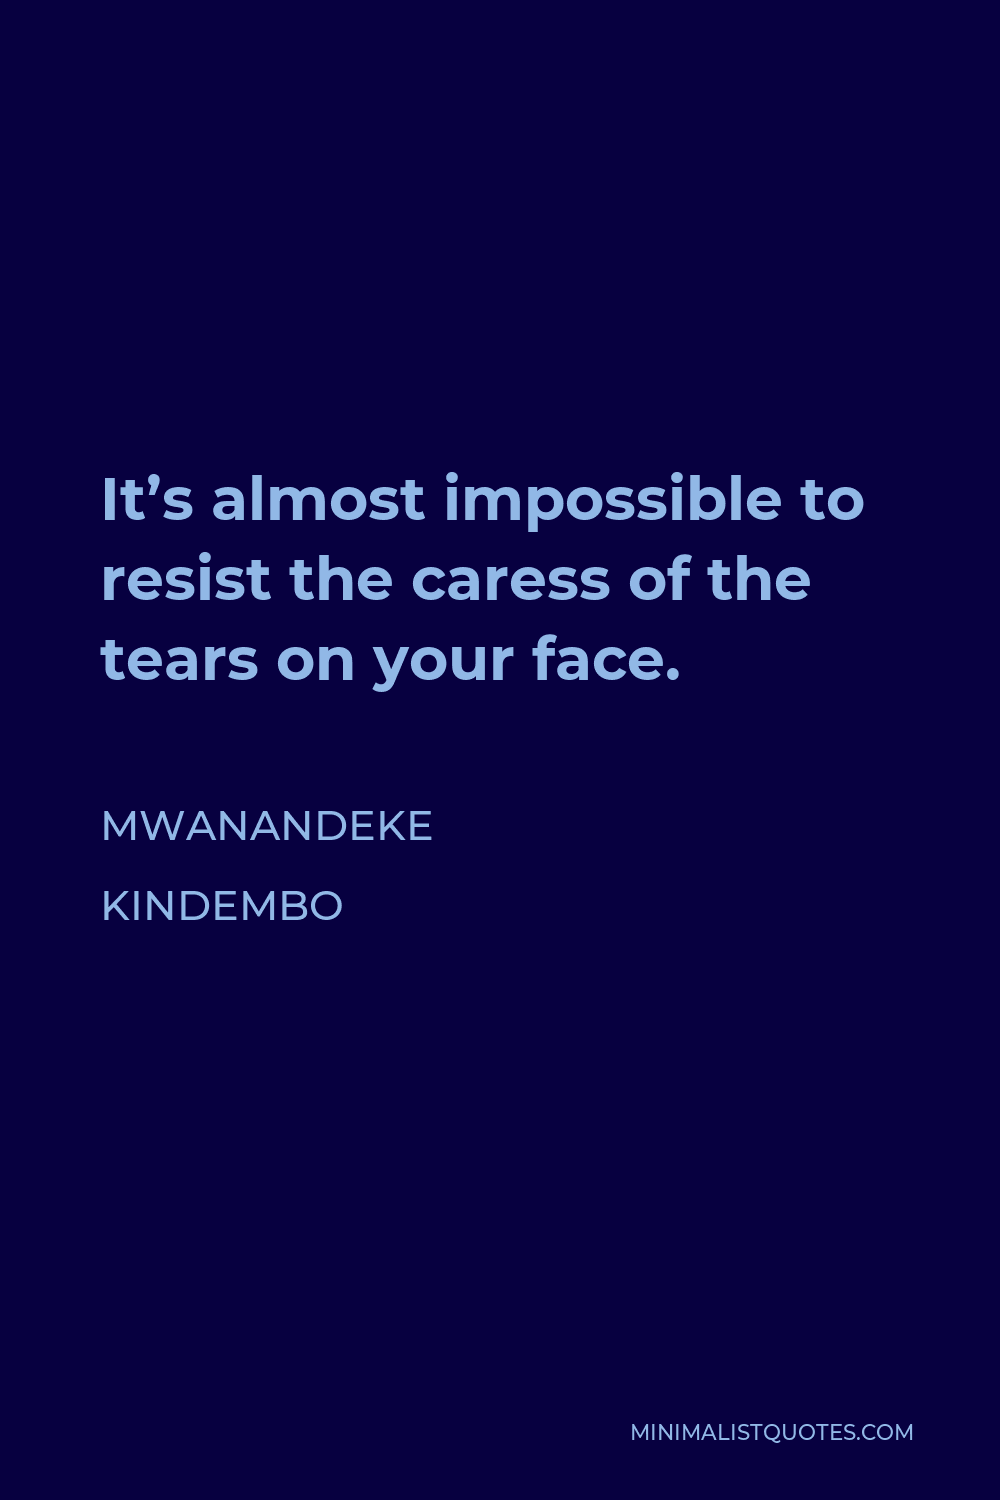 Mwanandeke Kindembo Quote - It’s almost impossible to resist the caress of the tears on your face.